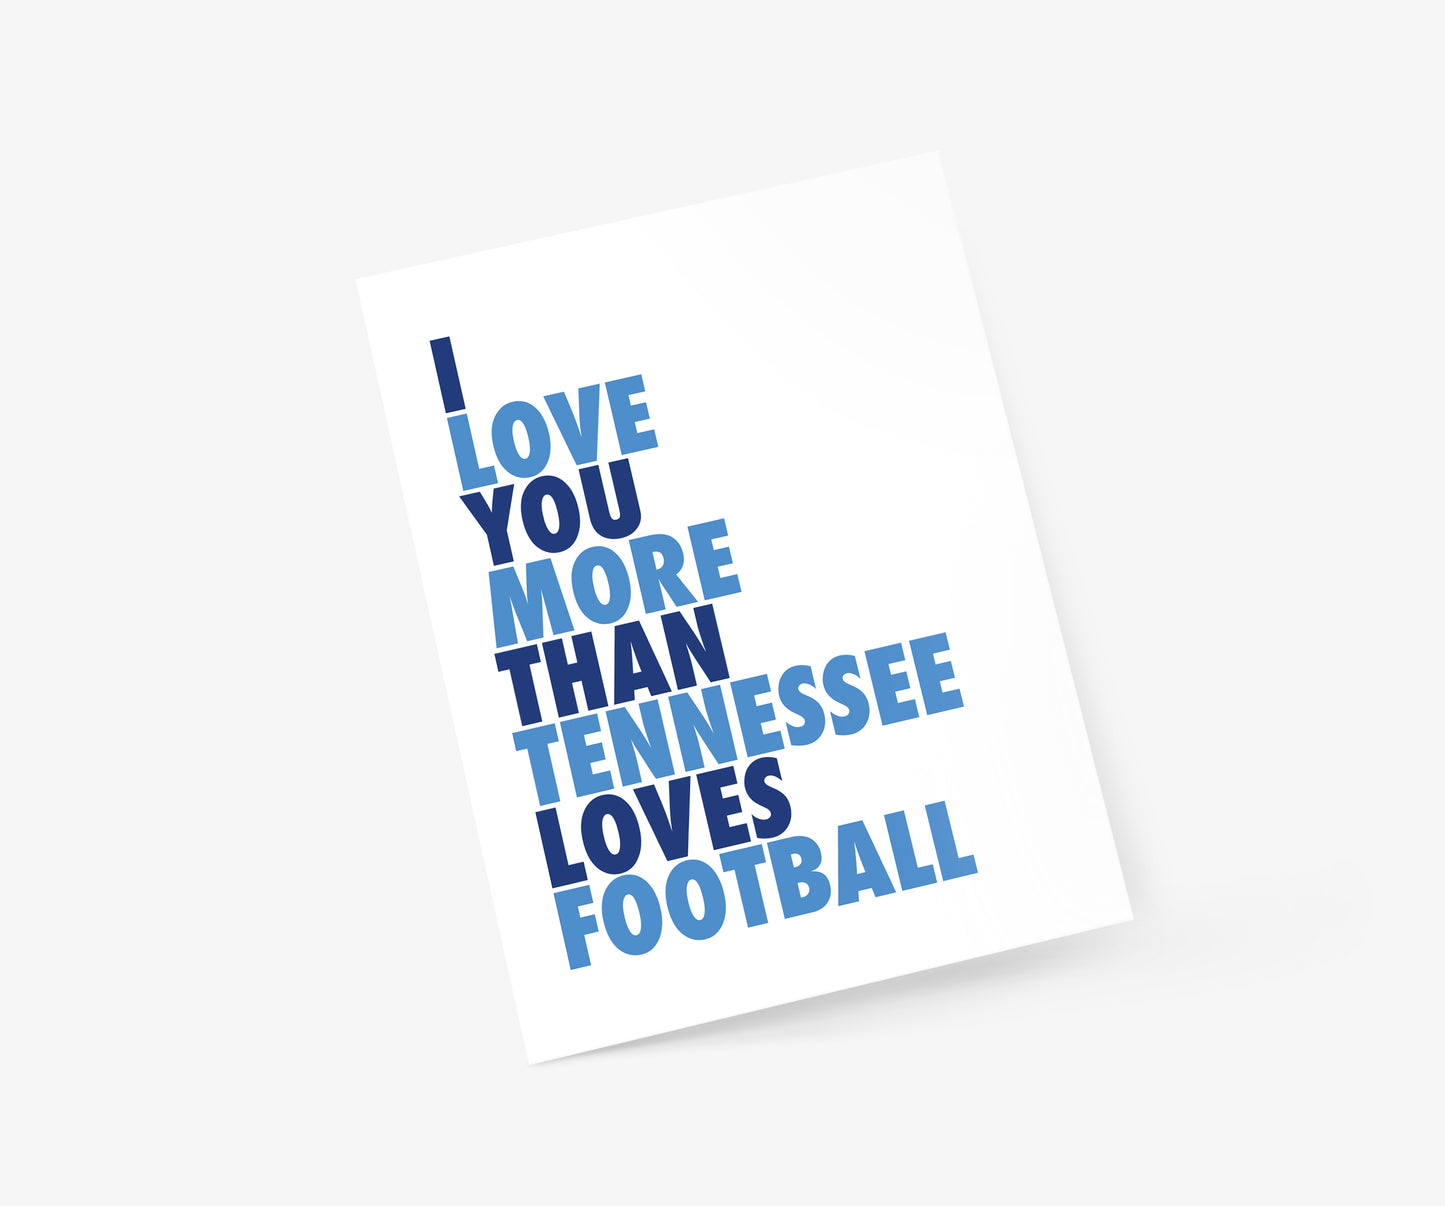 I Love You More Than Tennessee Loves Football Everyday Card | Footnotes Paper